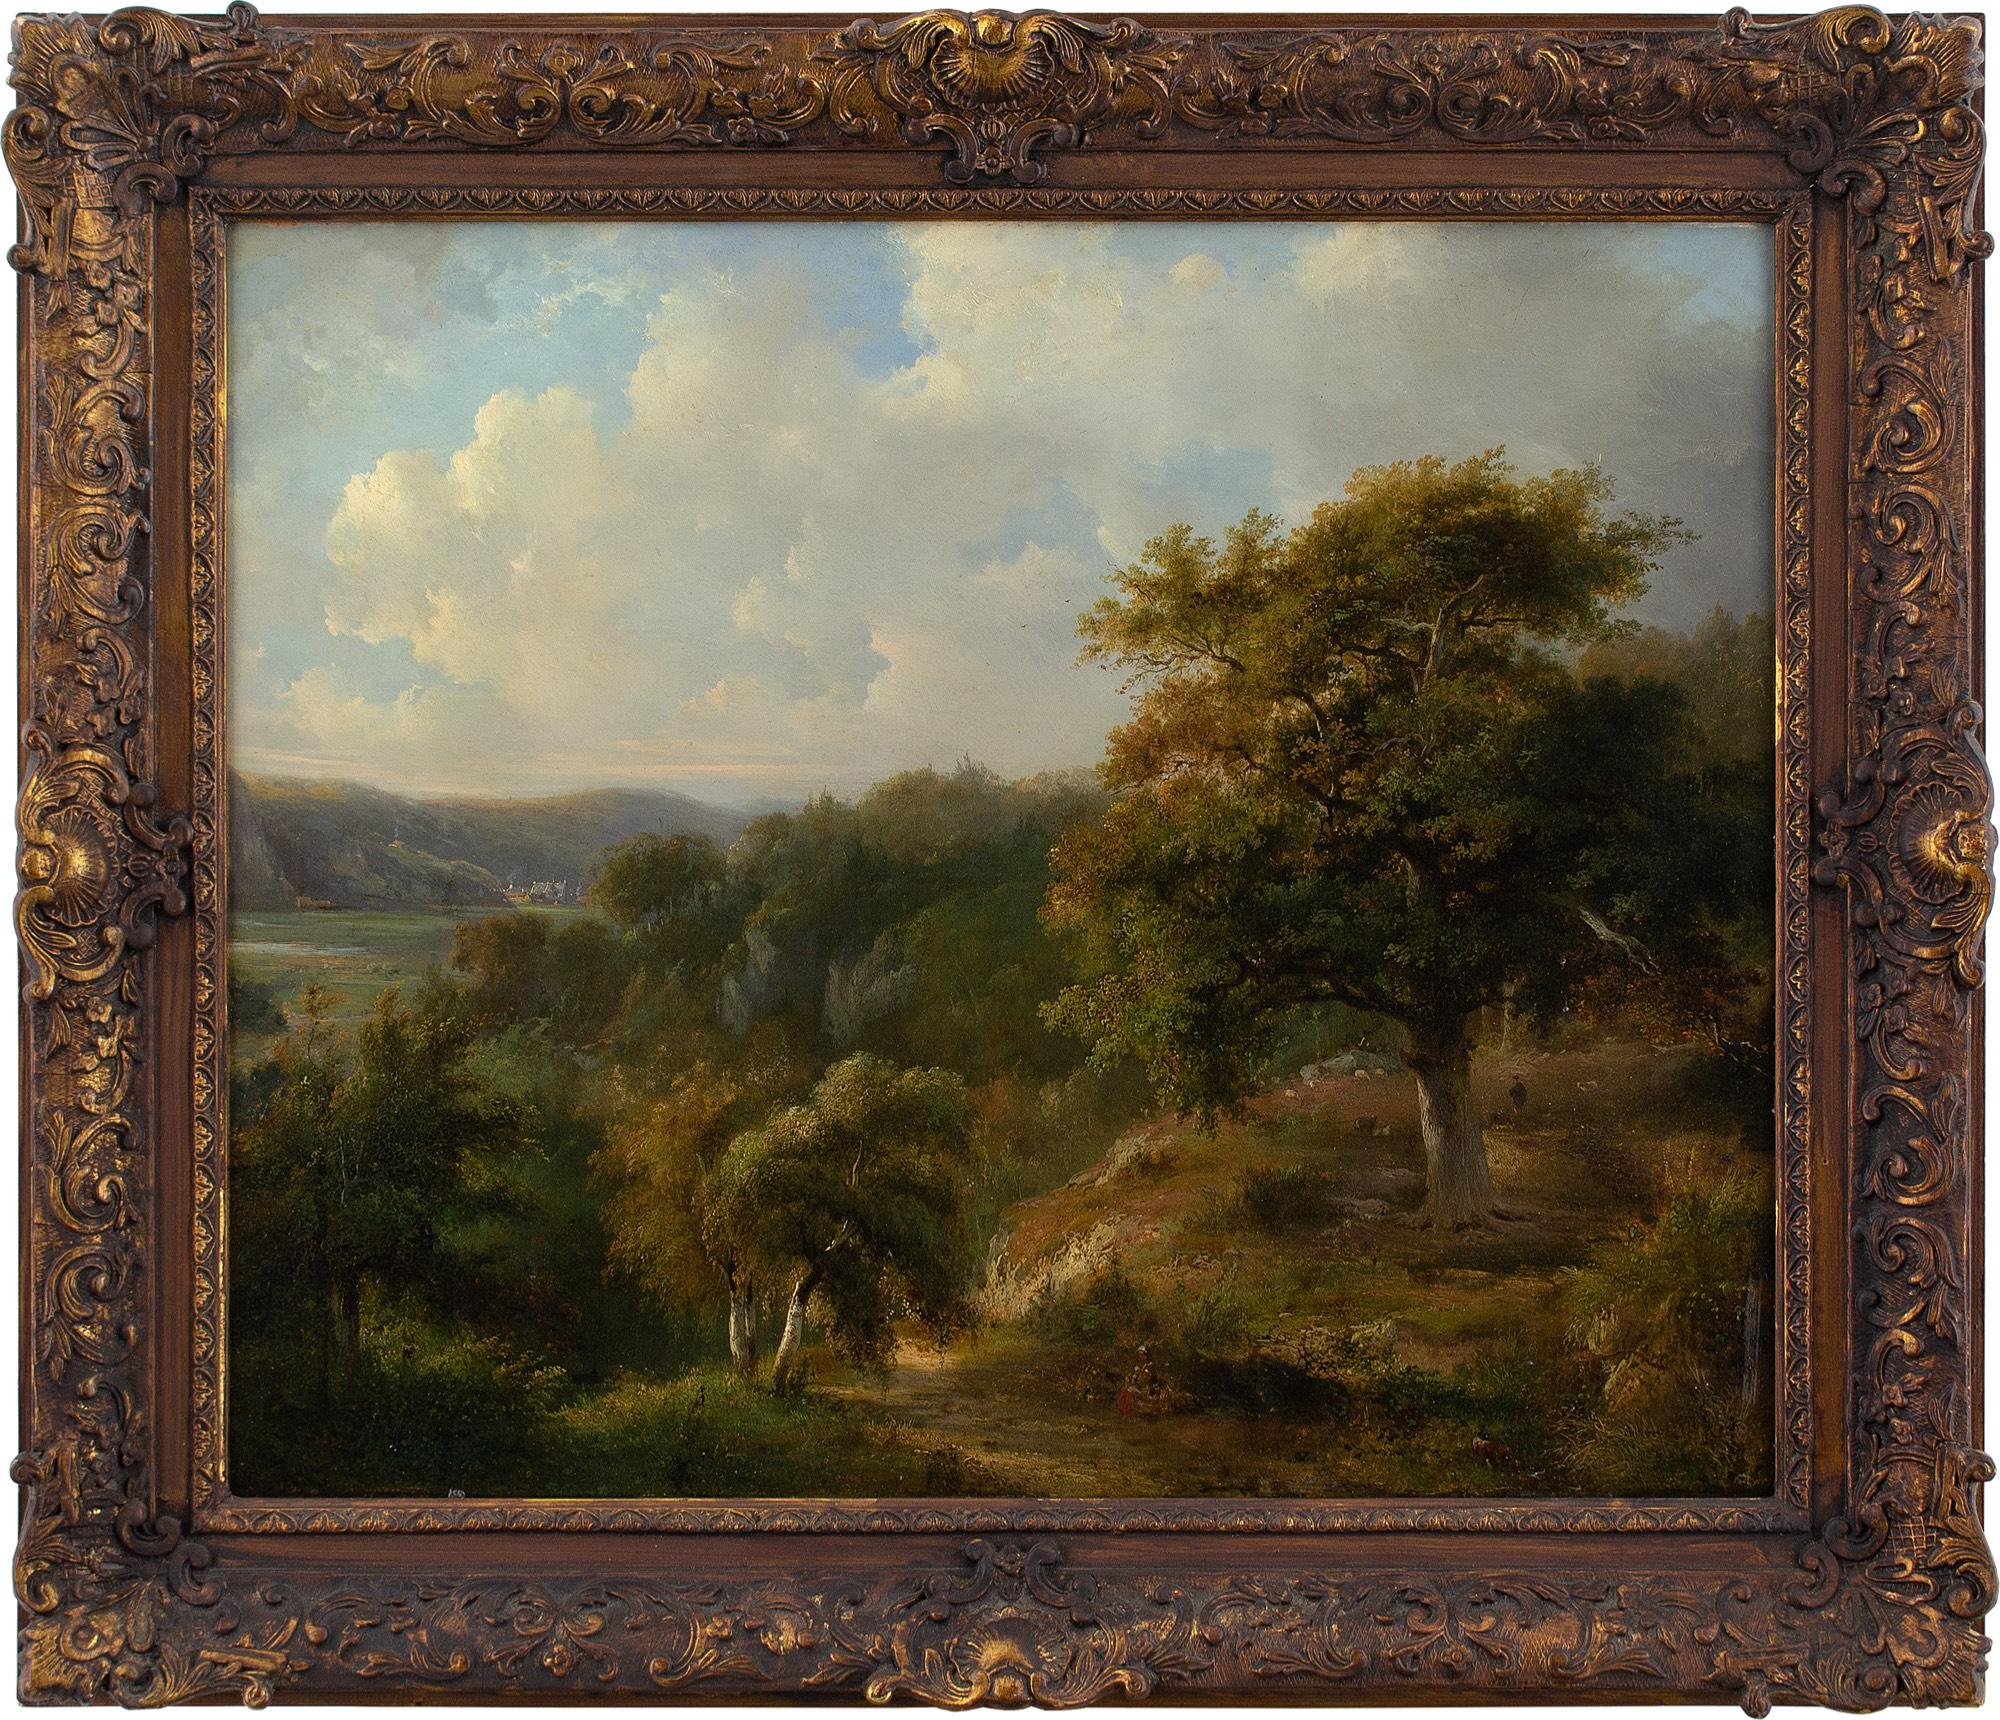 This fine mid-19th-century oil on panel by Dutch artist Pieter Caspar Christ (1822-1888) depicts a woodland landscape with distant cottages under a cloudy sky.

Standing under the bough of an ancient oak, a figure admires the vista. From here, atop